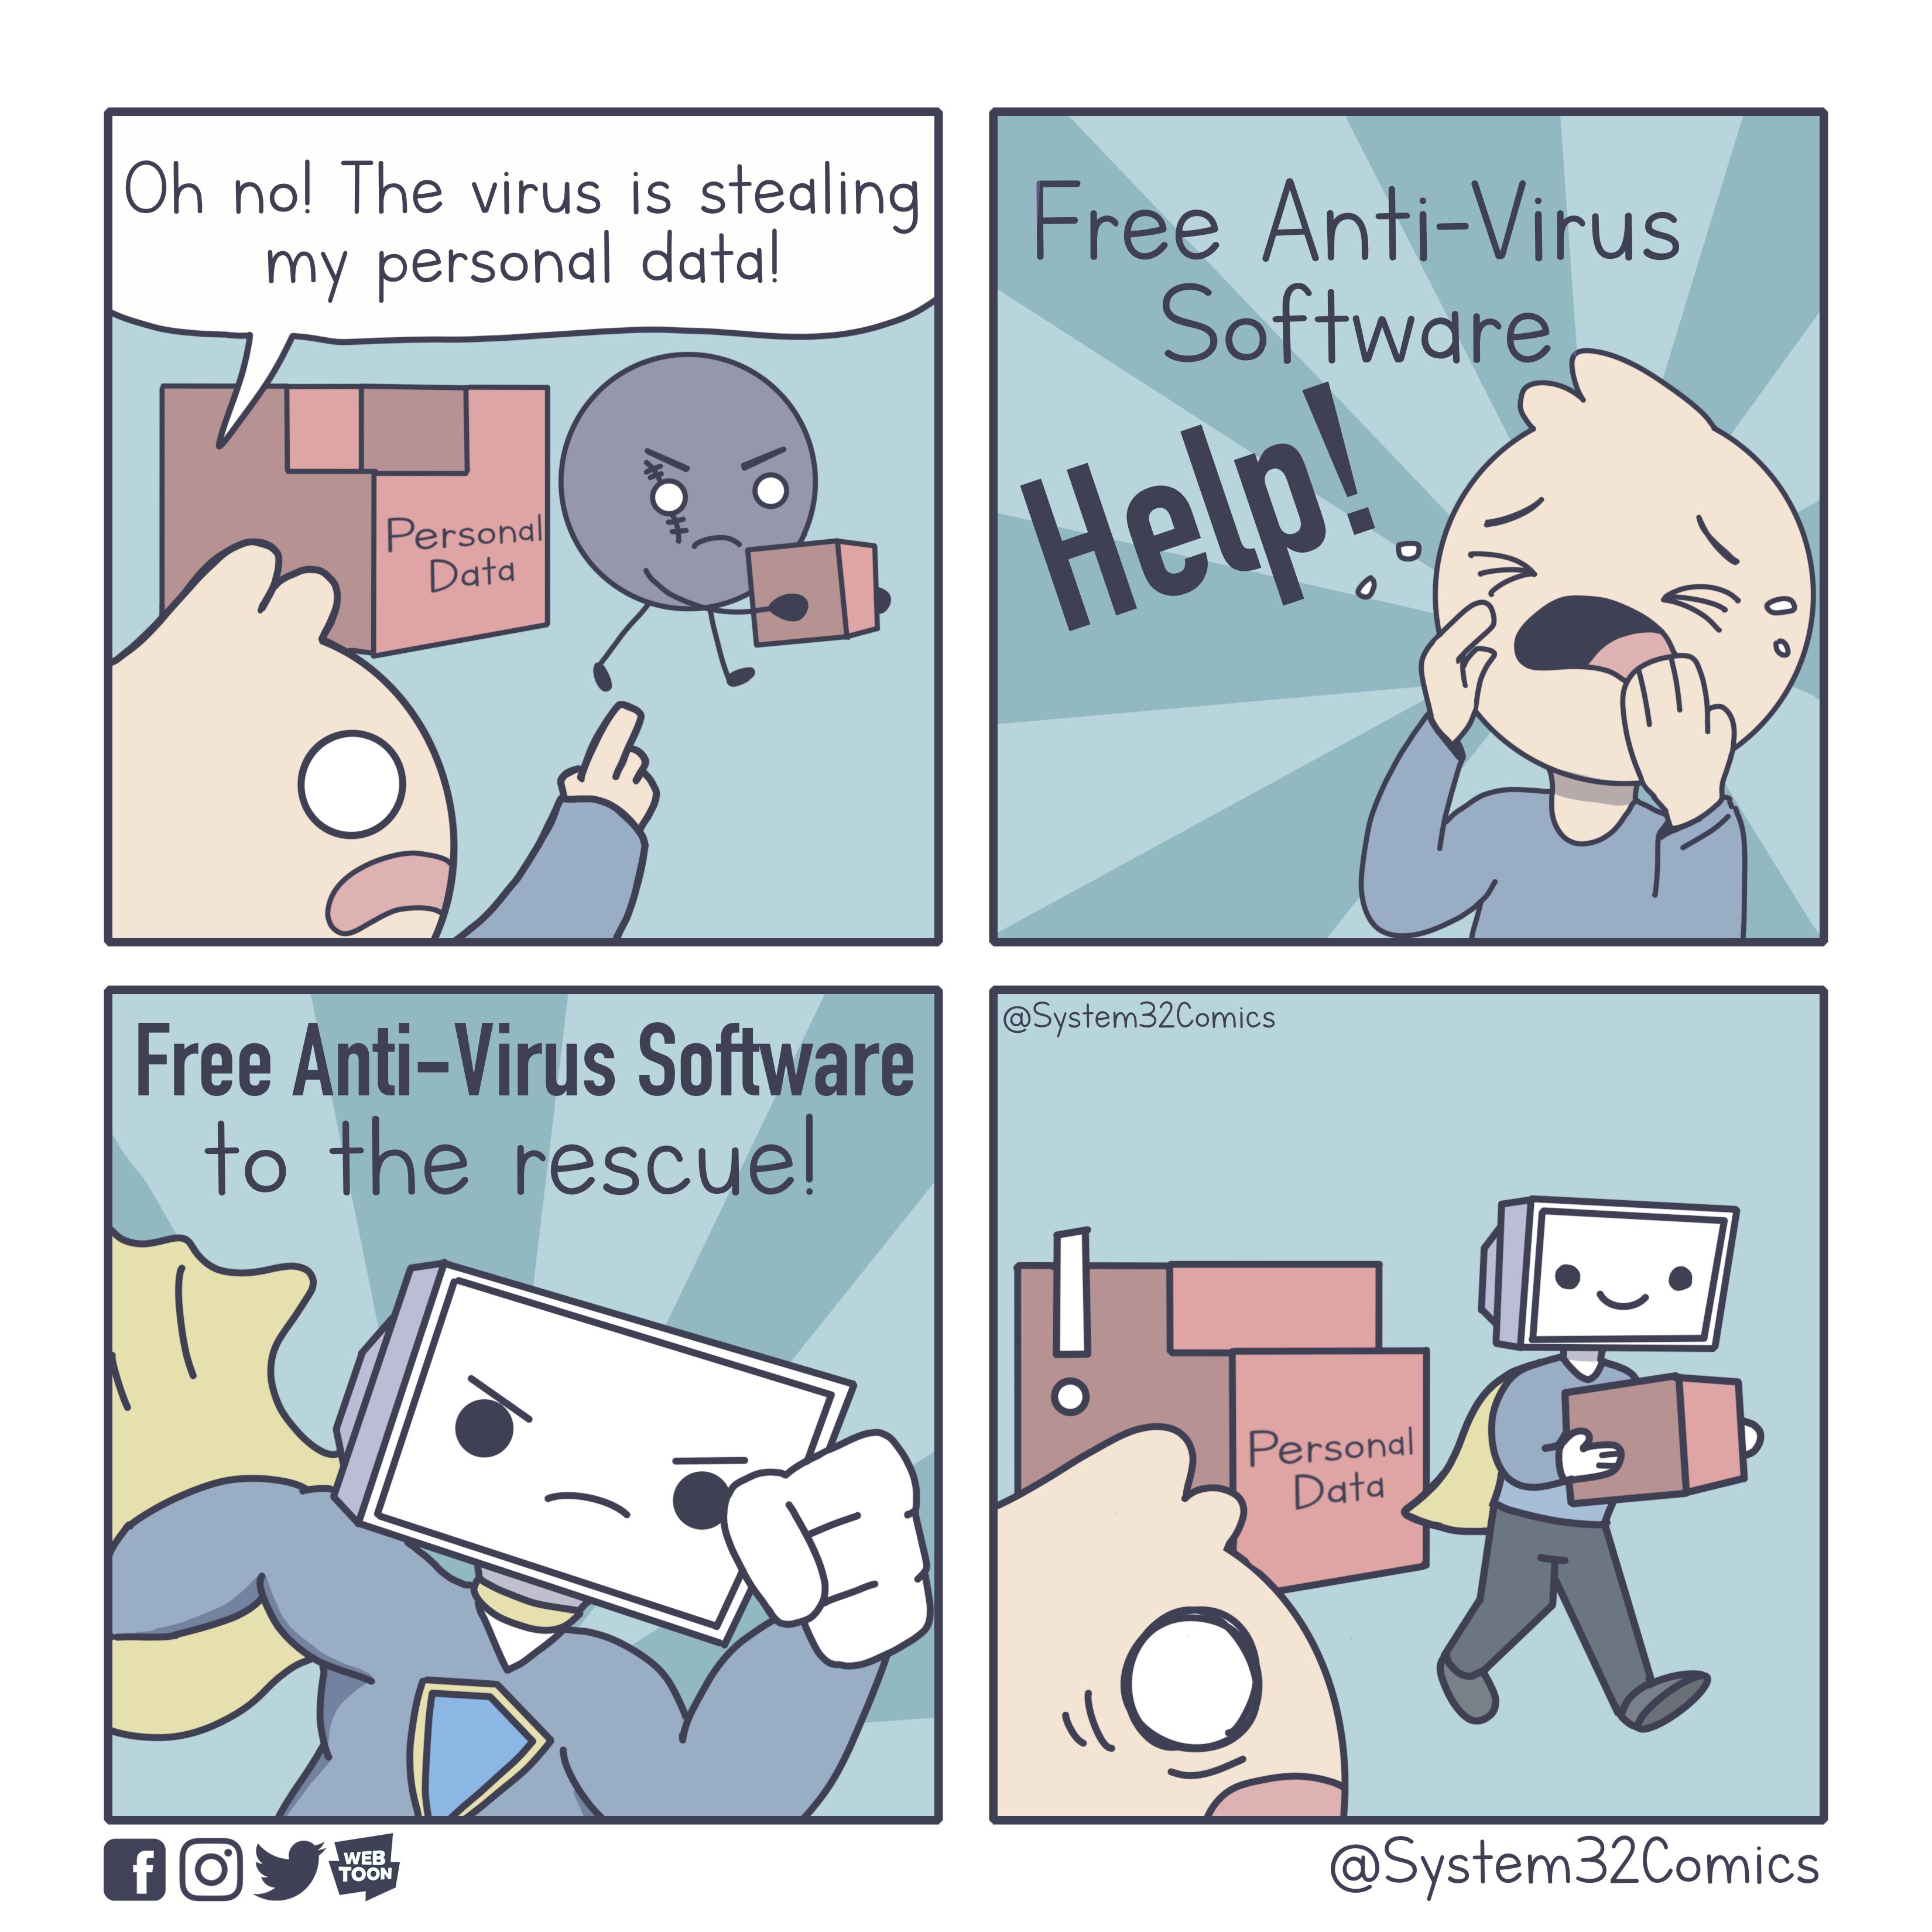 1. Oh no! The virus is stealing my personal data
2. Free Anti-Virus Software. HELP!
3. Free Anti-Virus Software to the rescue!

This comic was made by System32Comics. This comic is a repost of one of my classics. 